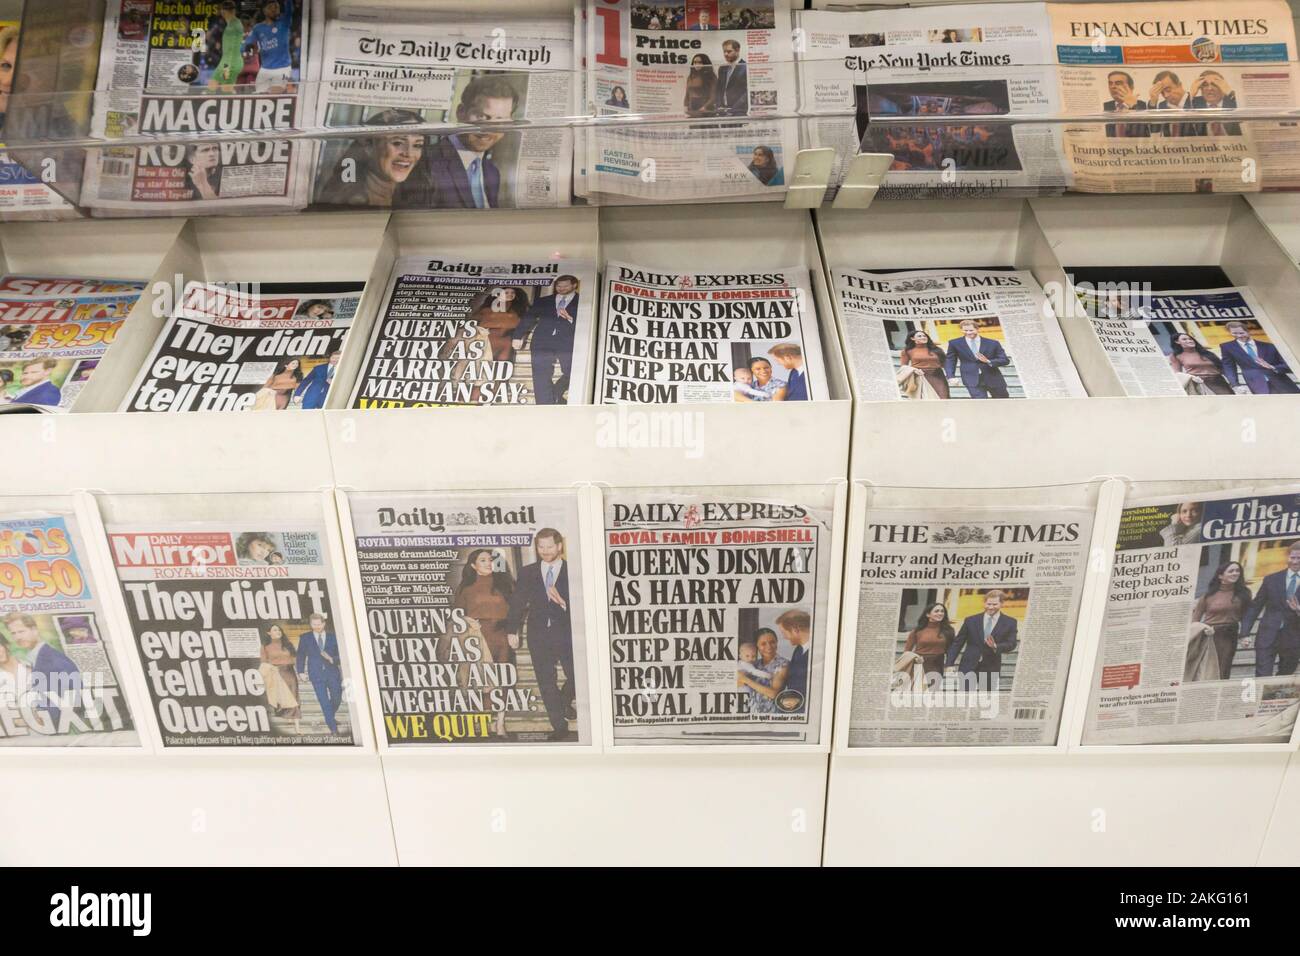 United Kingdom, 09 January 2020.  UK newspaper headlines react to the news that the Duke & Duchess of Sussex are to 'step back as senior members of the royal family'. Credit UrbanImages-News/Alamy. Stock Photo